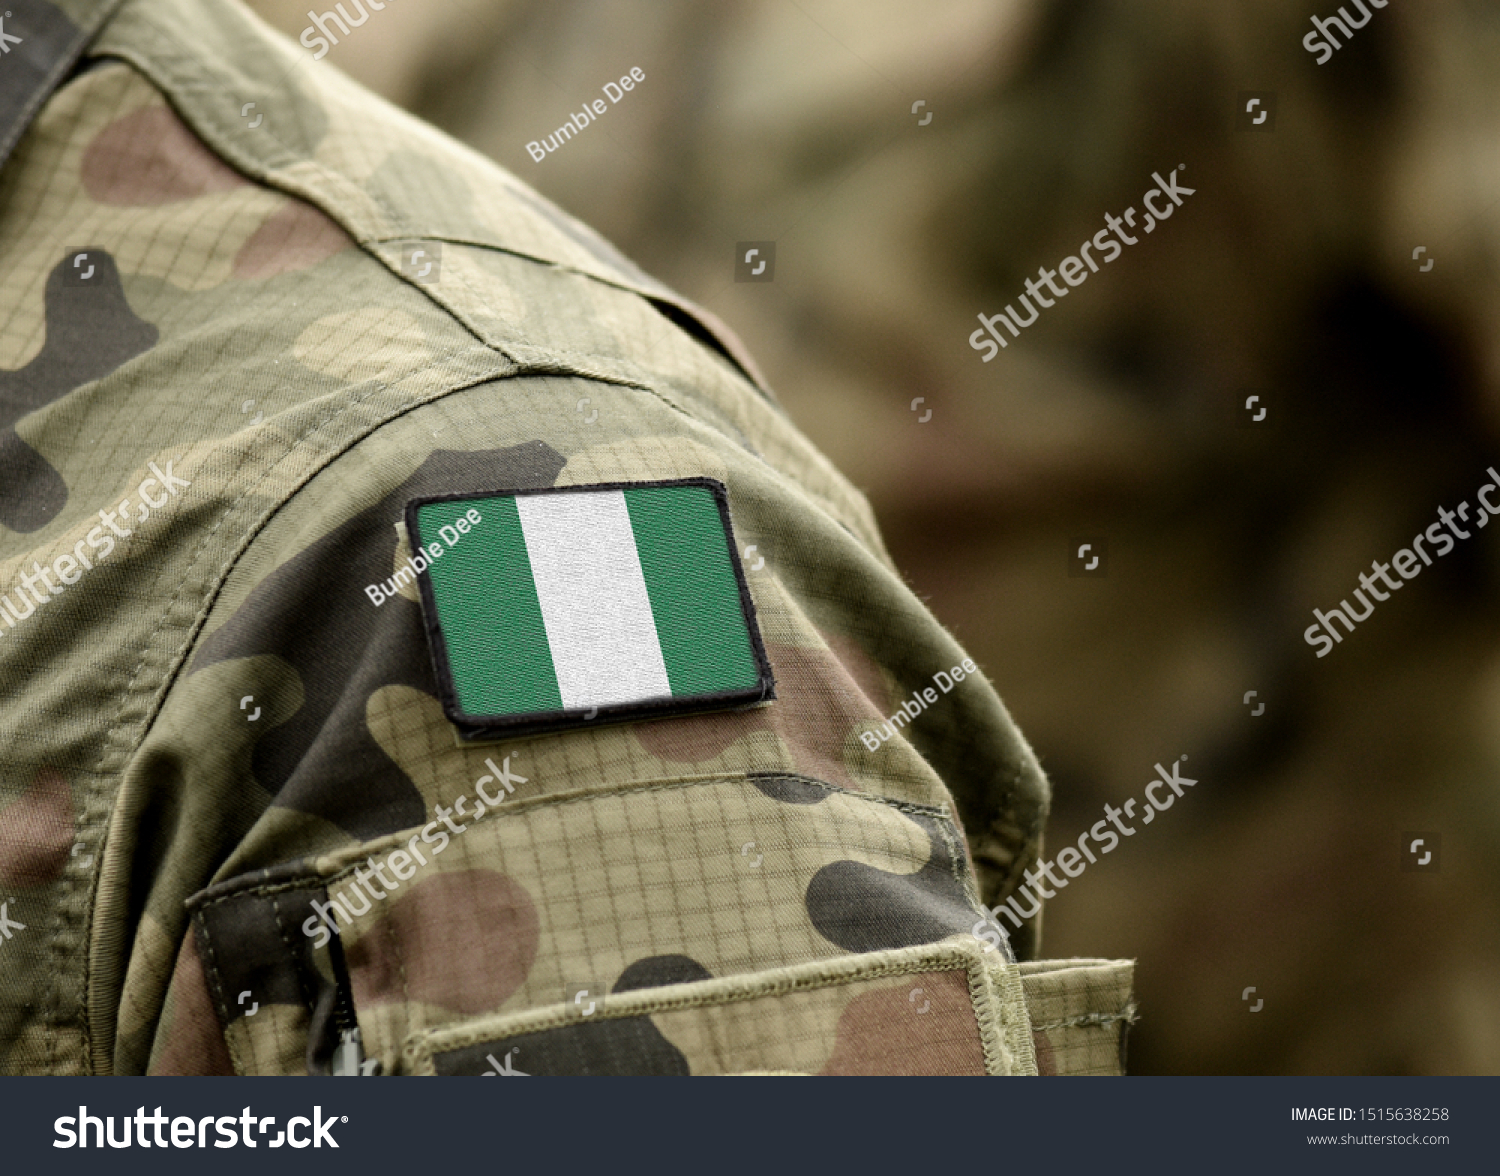 87 Nigerian Armed Forces Images, Stock Photos & Vectors | Shutterstock